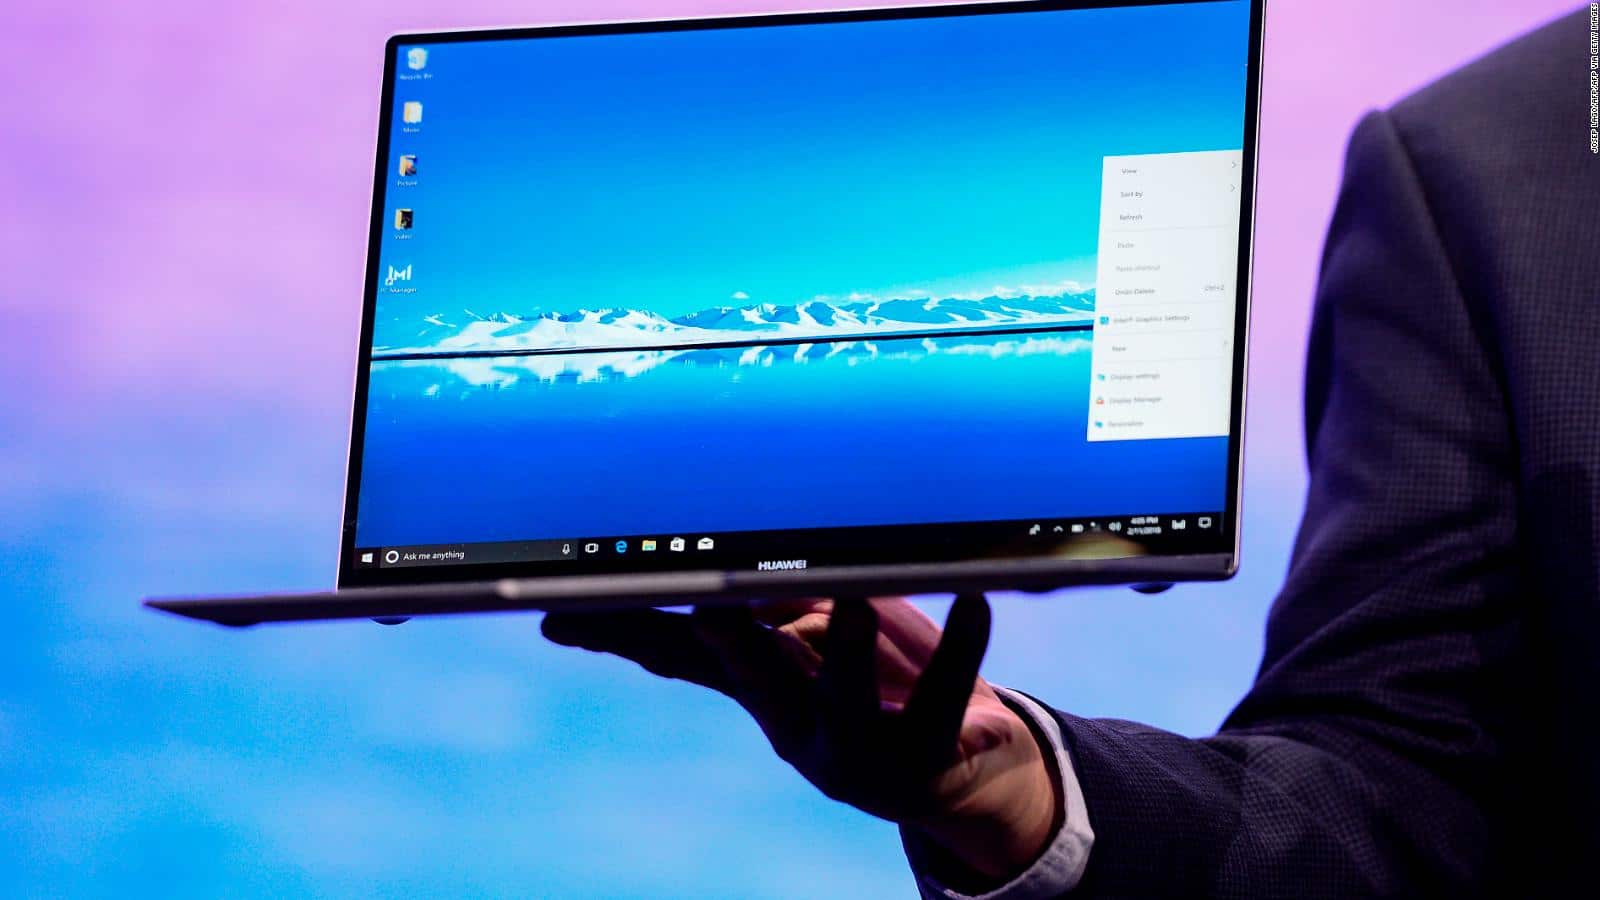 Want a new laptop? Here are the 5 best ones to buy in 2020 | Video | CNN